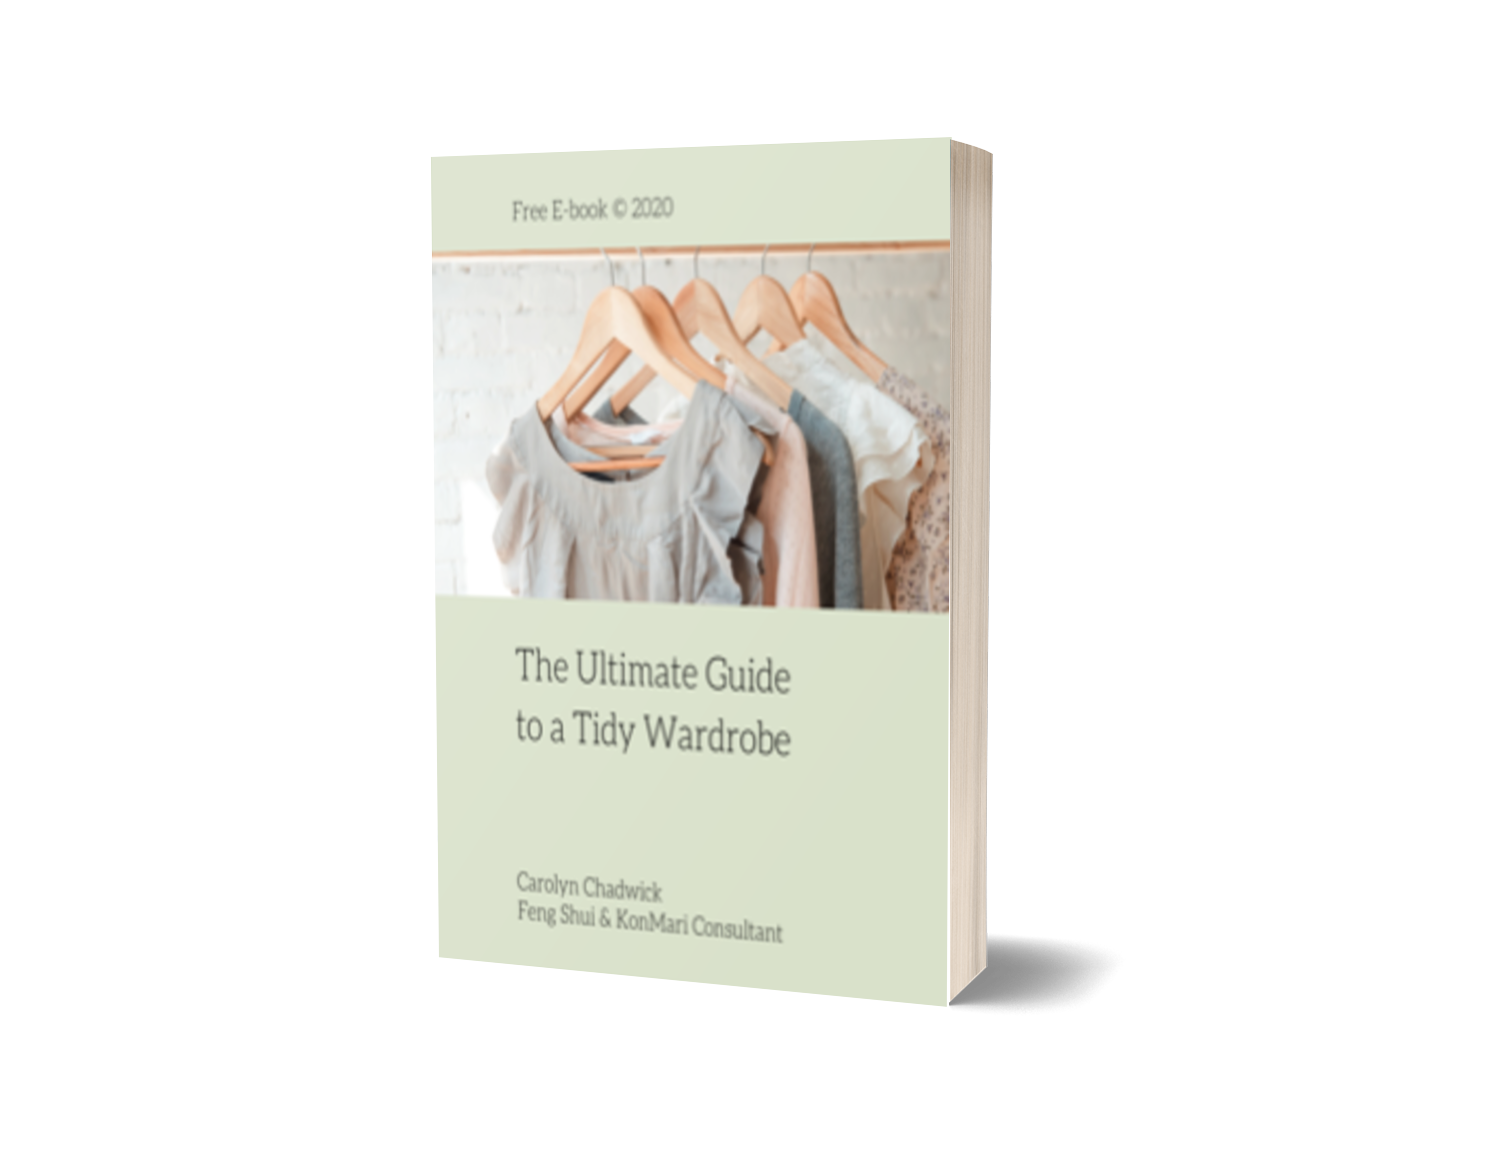 the Ultimate guide to a tidy wardrobe